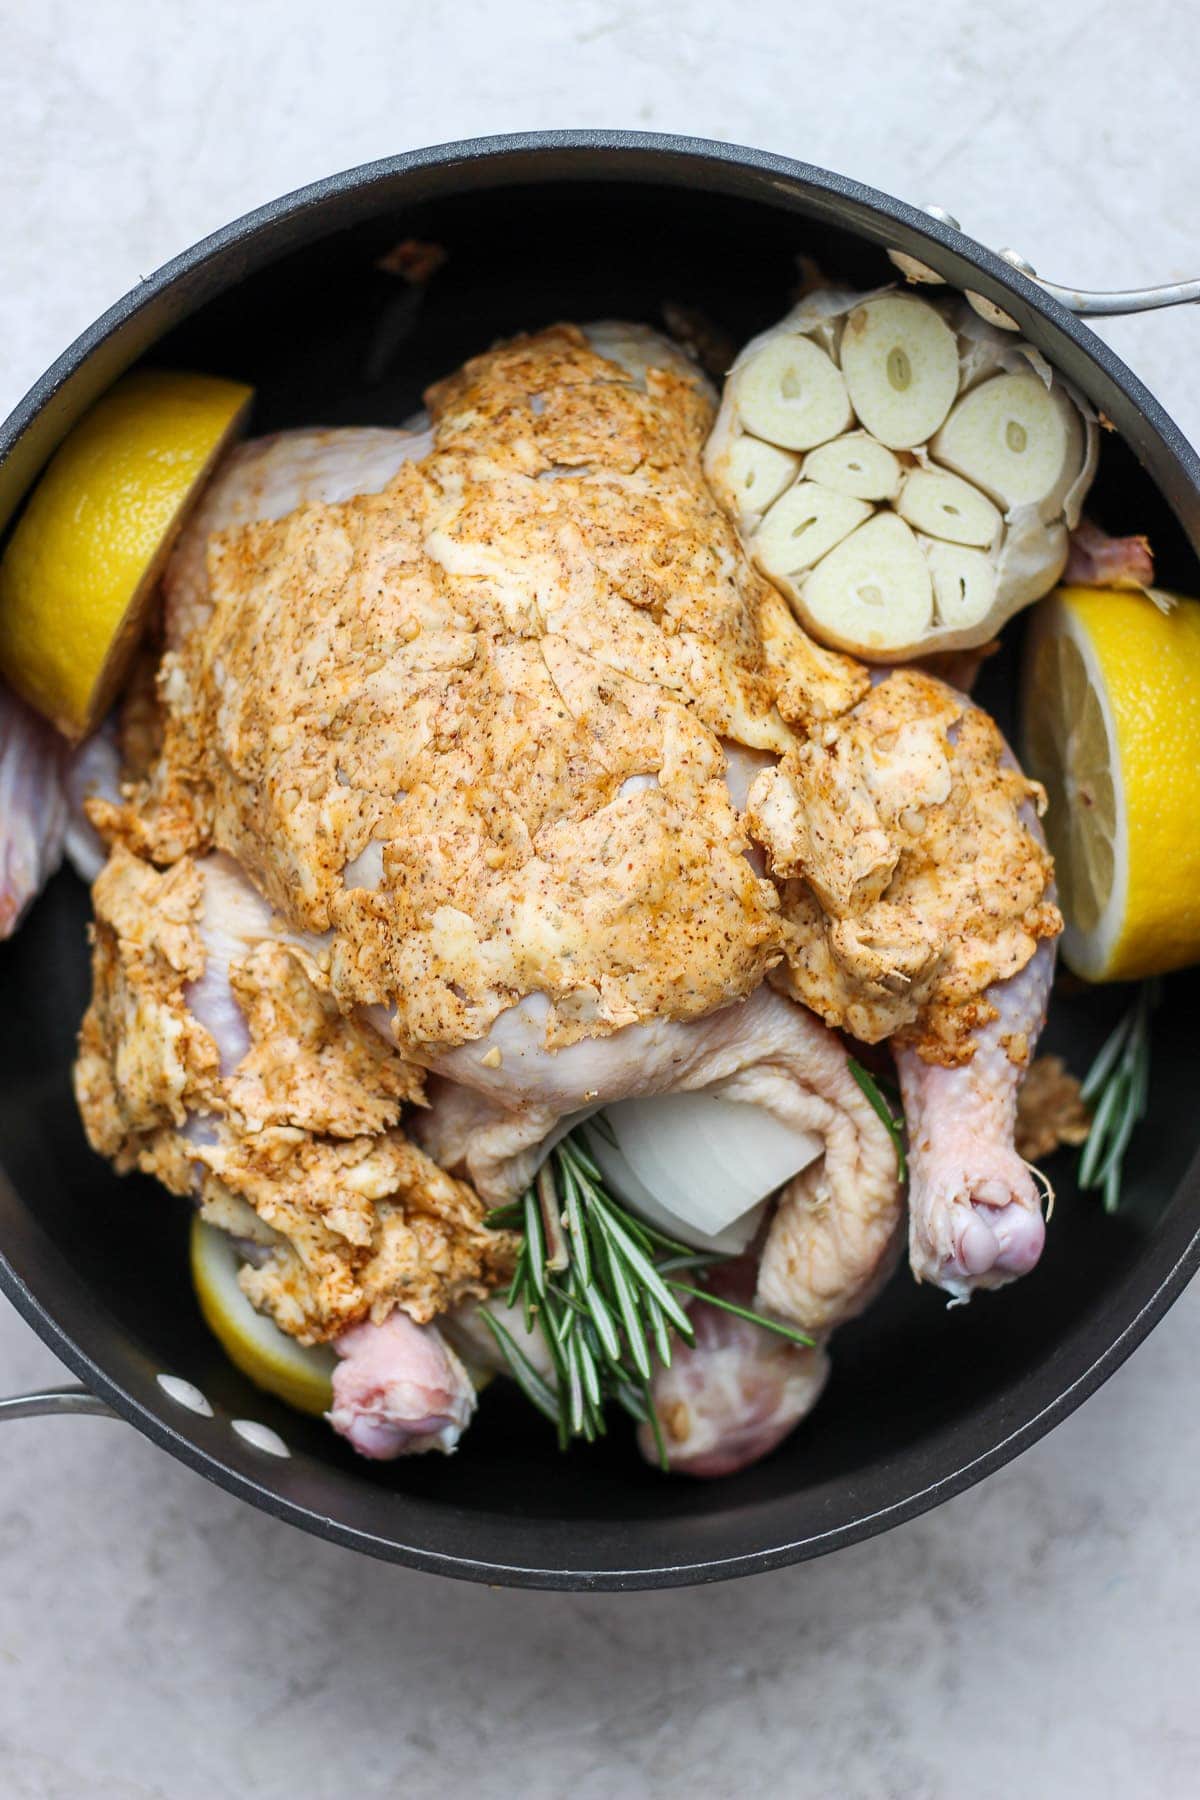 https://fitfoodiefinds.com/wp-content/uploads/2020/10/roasted-chicken-6.jpg